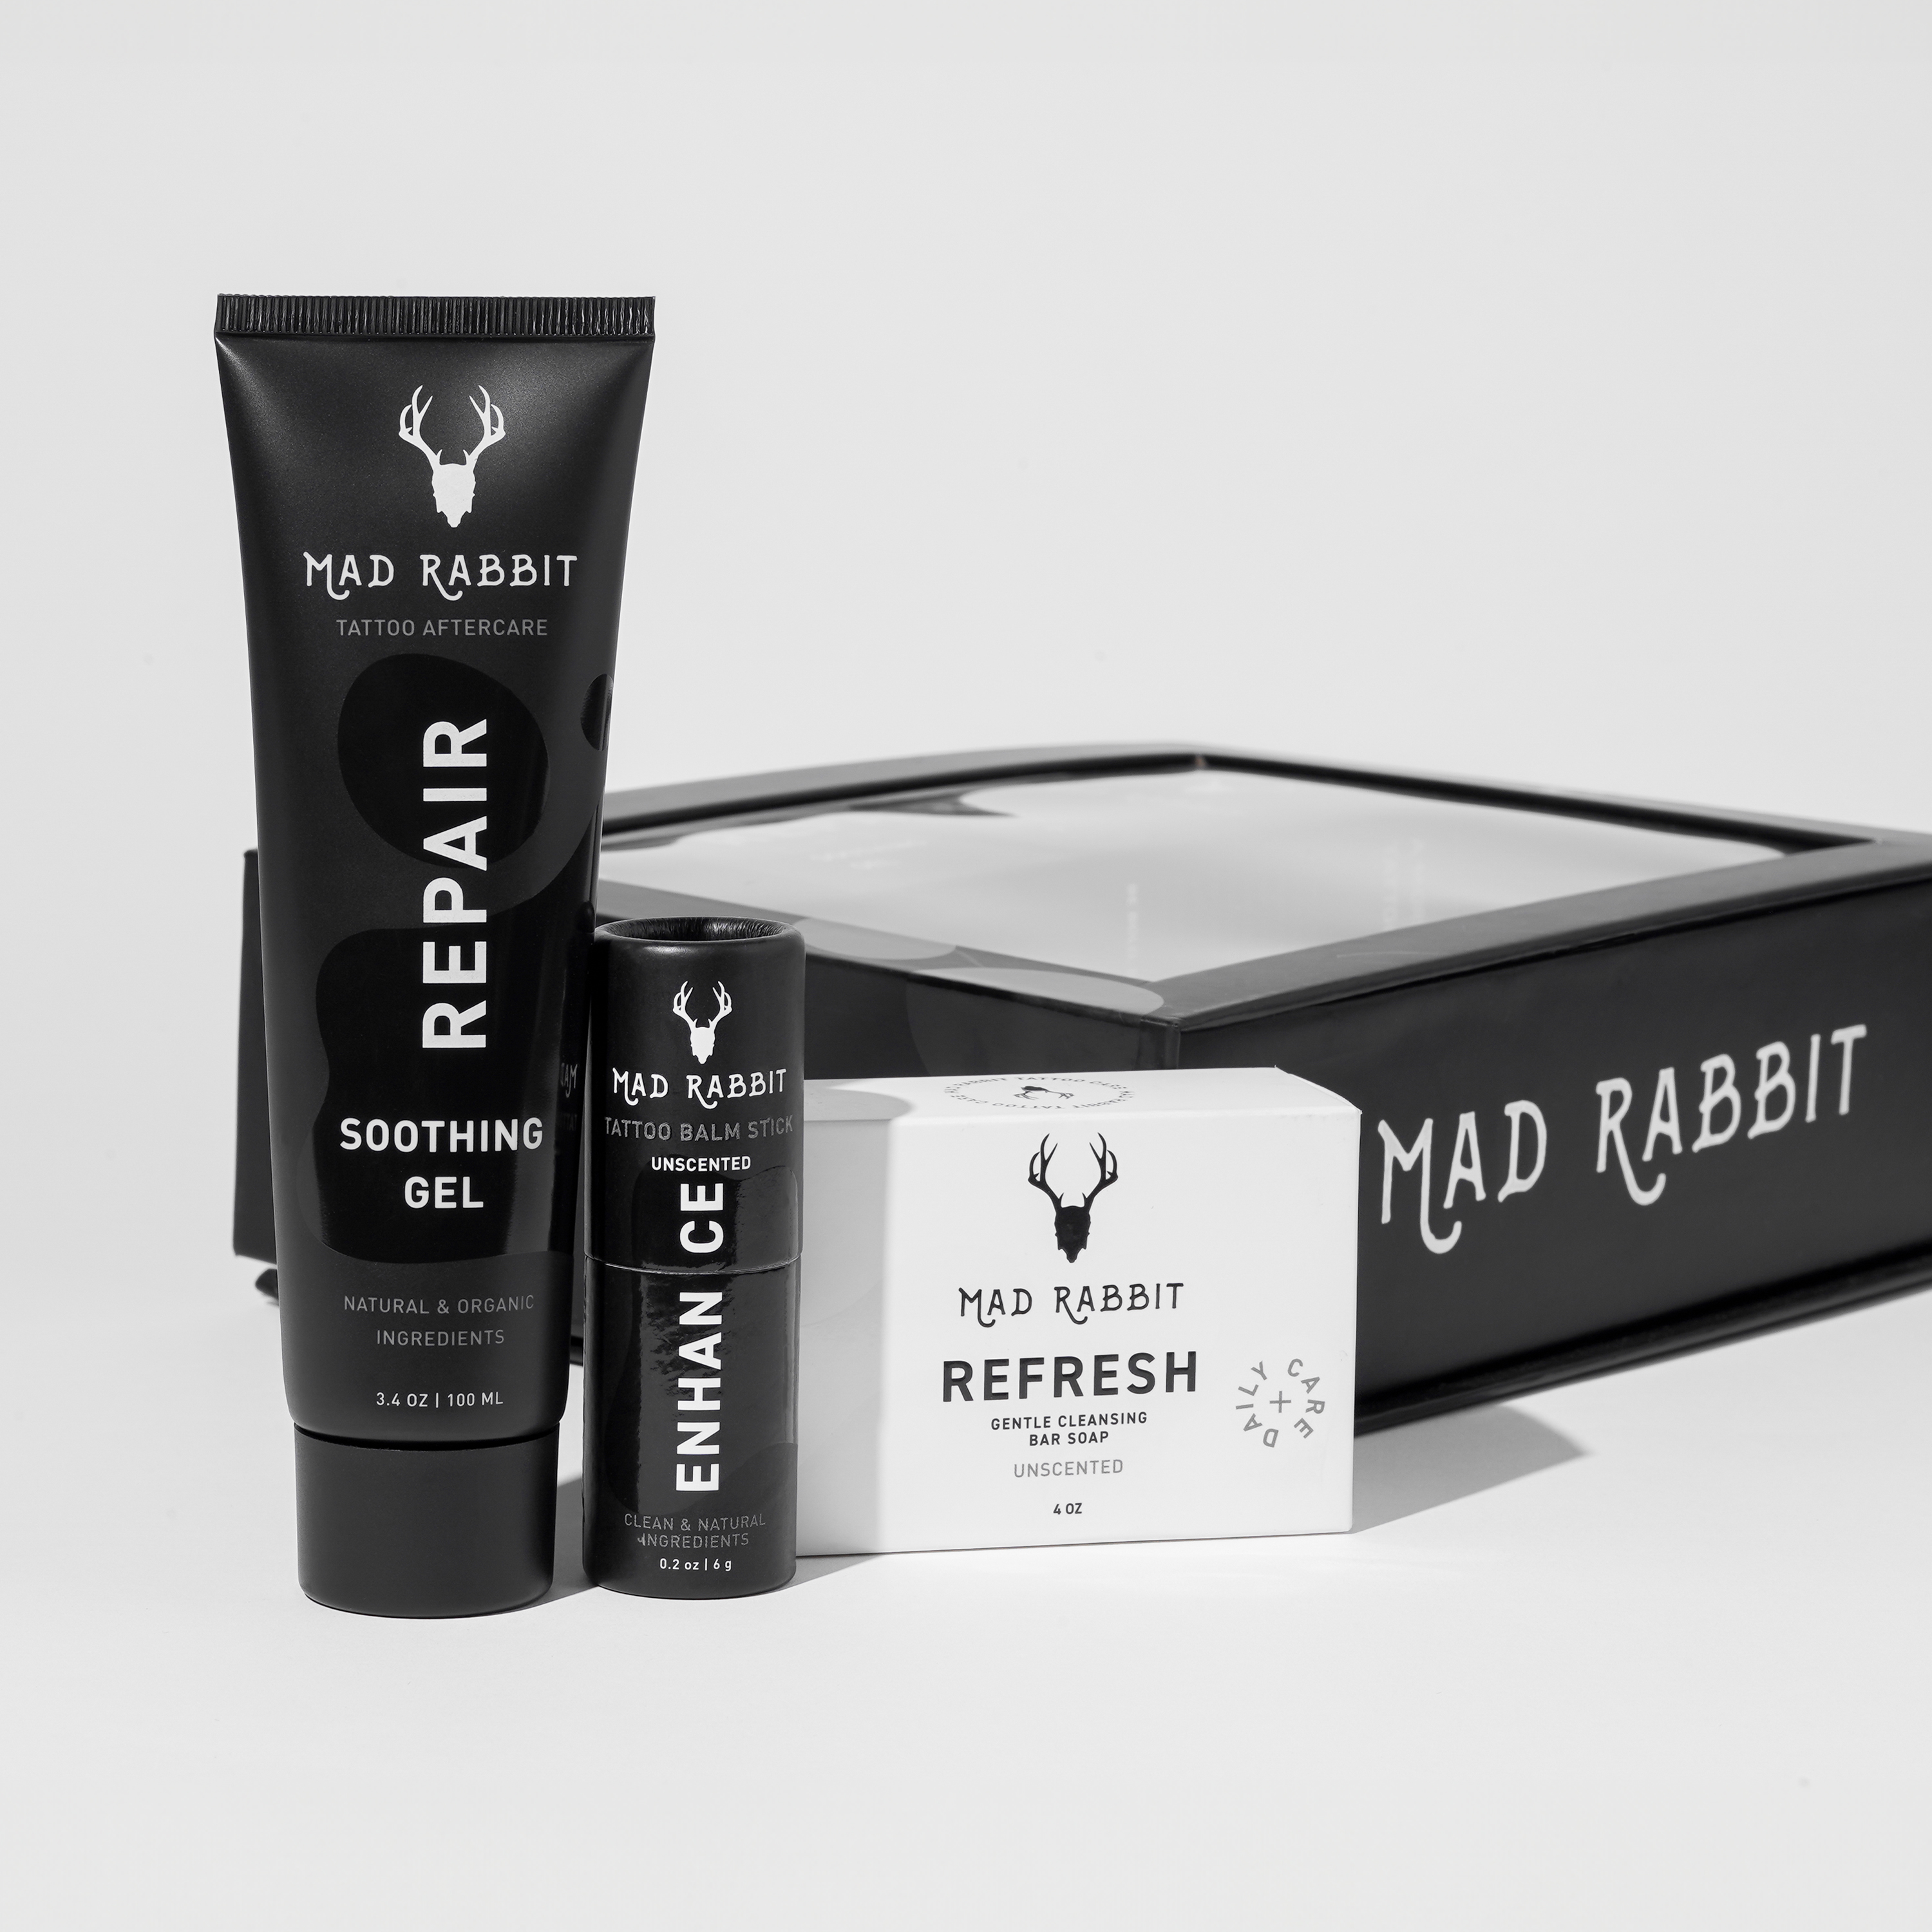 Mad Rabbit Soothing Gel